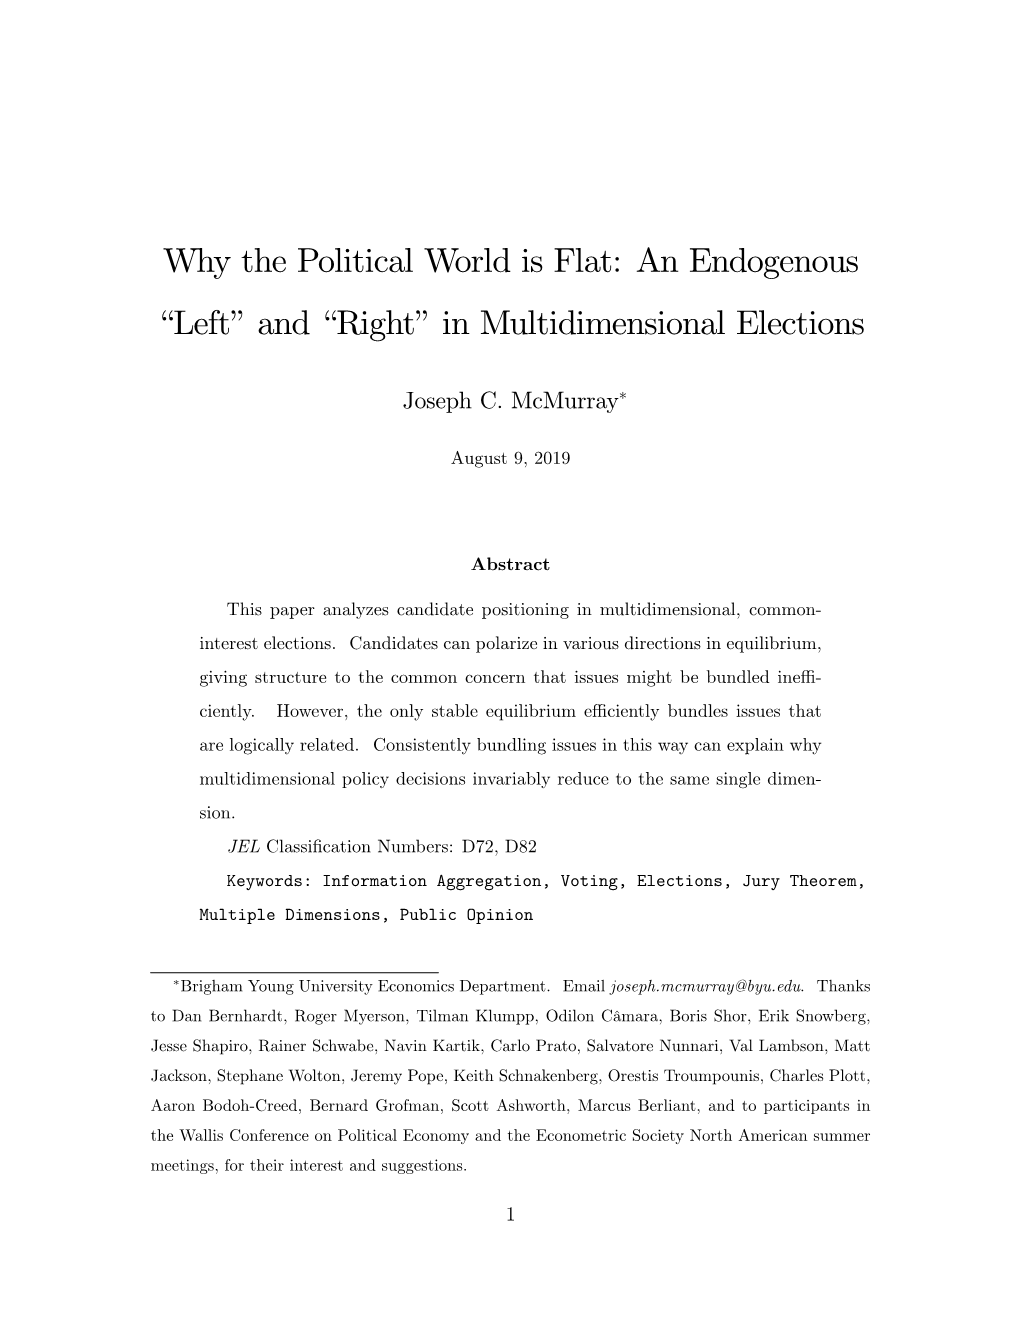 Why the Political World Is Flat: an Endogenous Nleftoand Nrightoin